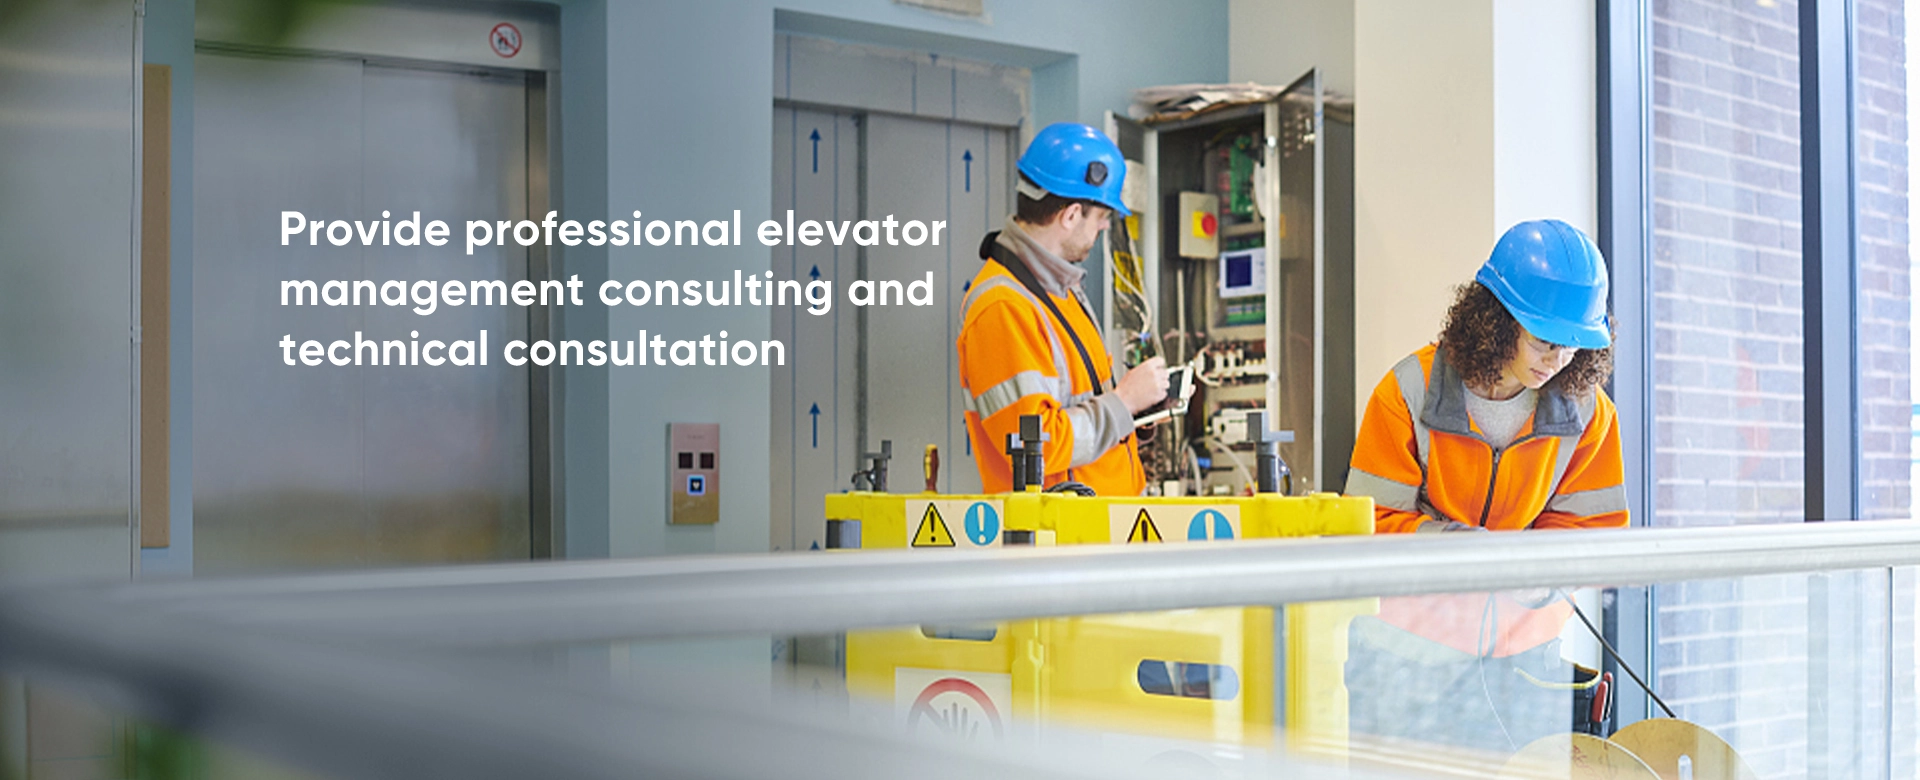 Provide Professional Elevator Management Consulting and Technical Consultation